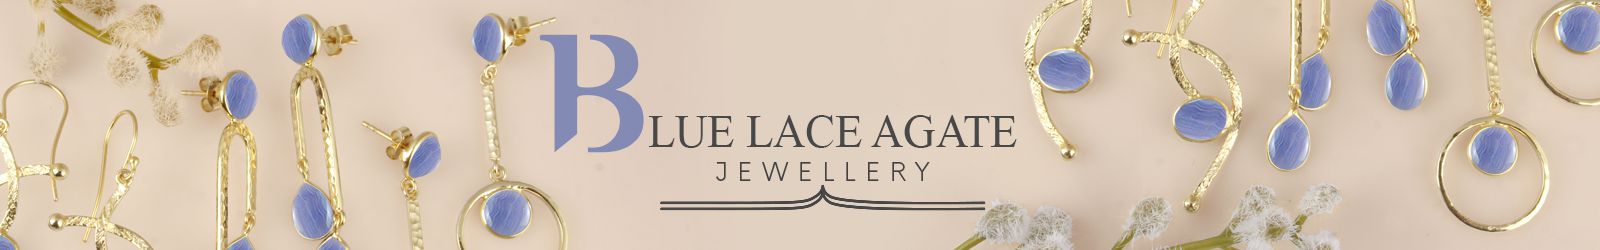 Silver Blue Lace Agate Jewelry Wholesale Supplier